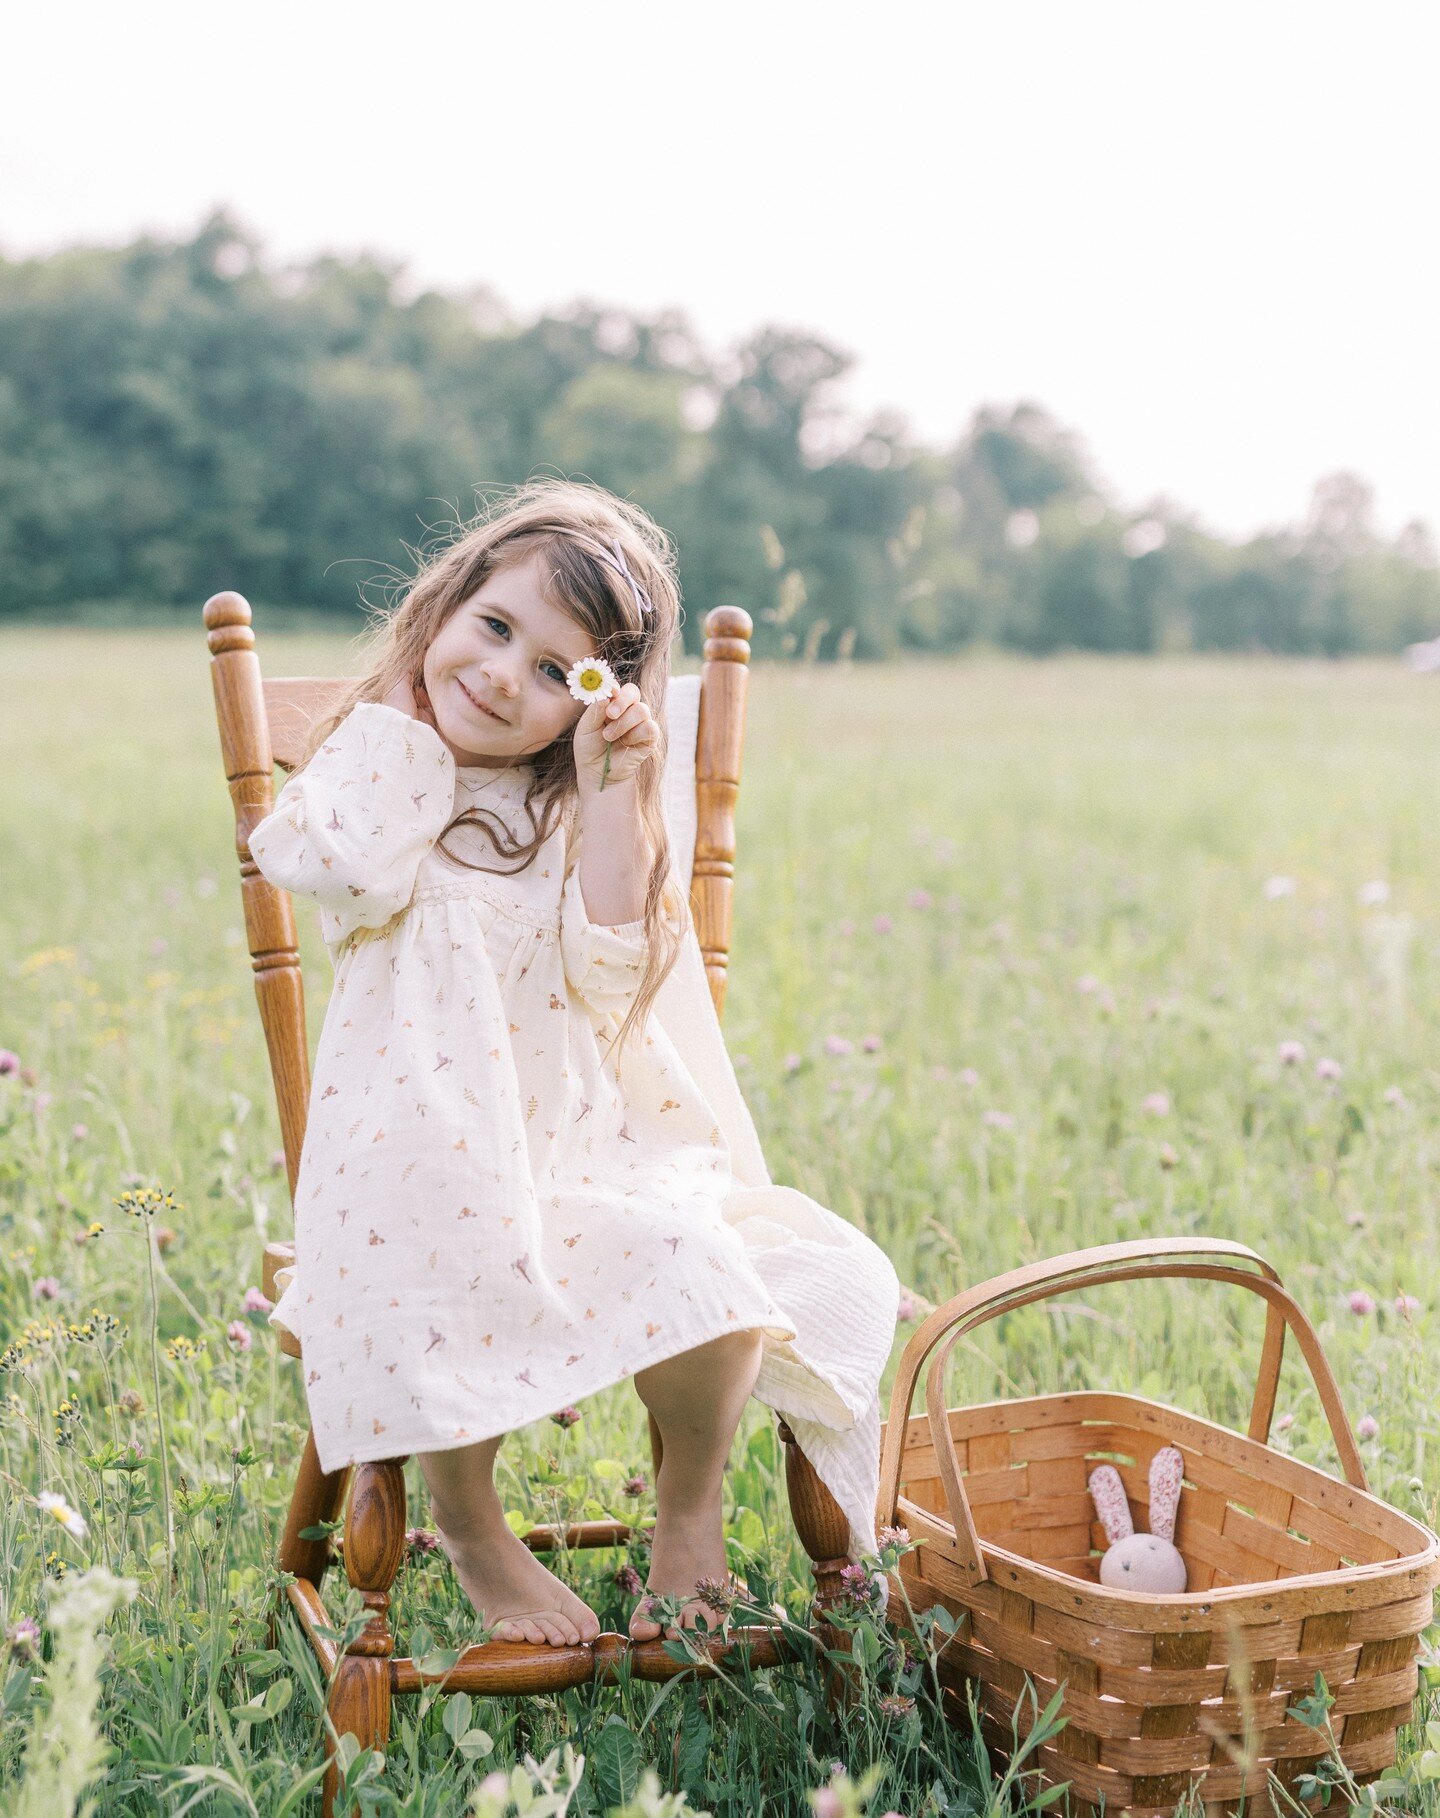 It's only February, but I'm already dreaming of Spring, and children running barefoot in the wildflower field 🥹. Who's with me? 

P.S: This Lola dress from @greenandflora is available in our Client Wardrobe, which you will have access to when you bo